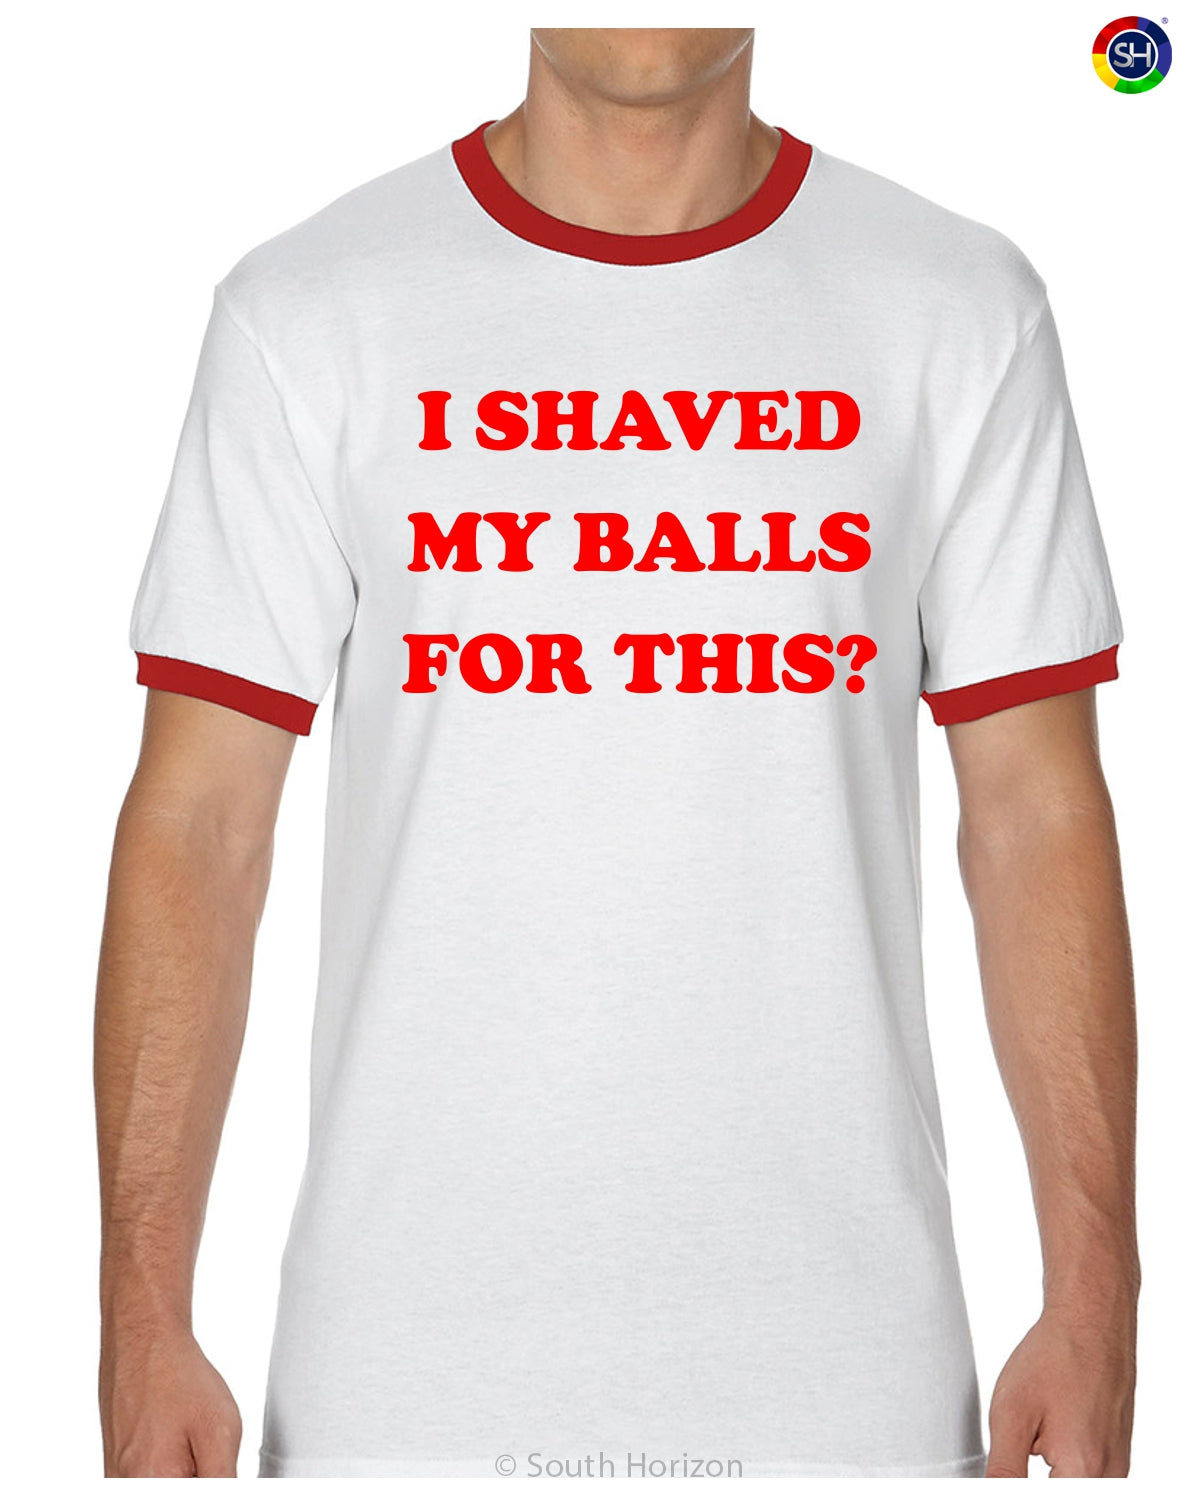 I SHAVED MY BALLS FOR THIS Ringer Tee